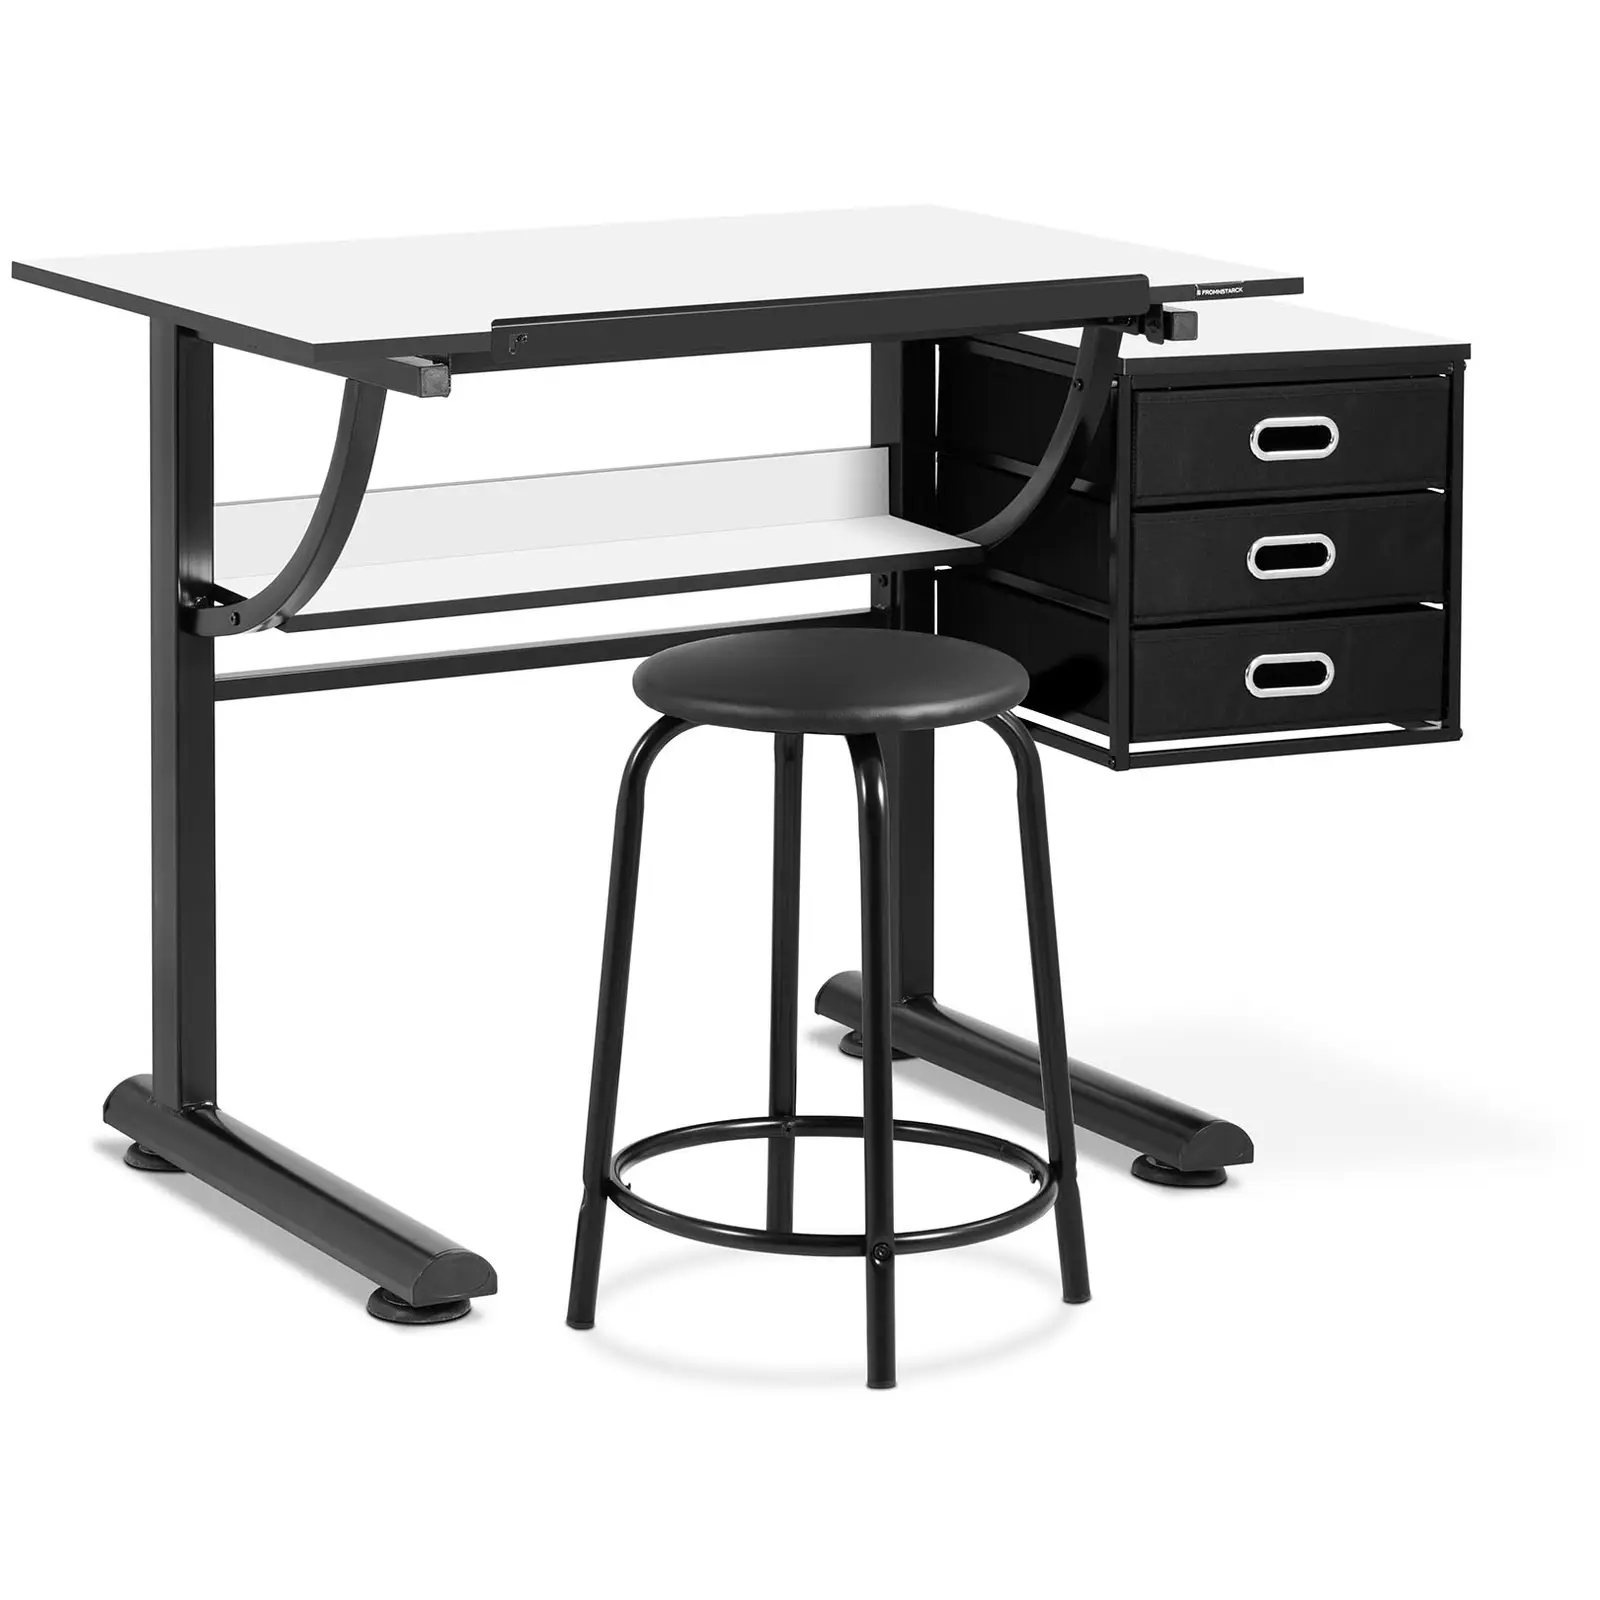 Drawing table with stool for architects and artists - 900 x 600 mm - drawers